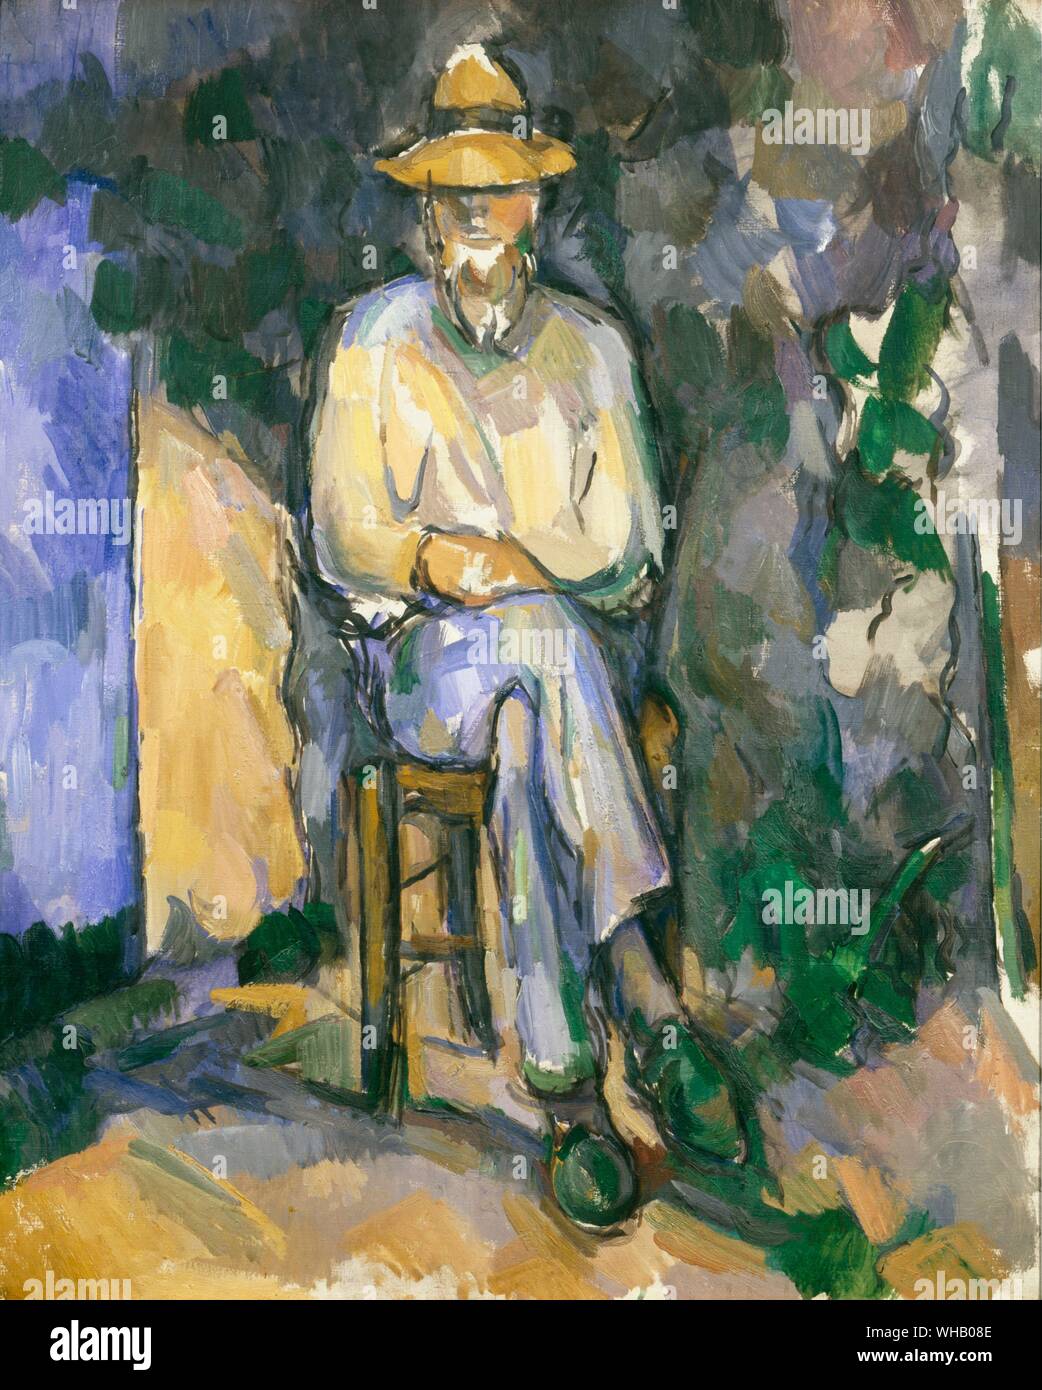 The Gardener. by Cezanne. Paul Cézanne (January 19, 1839 - October 22, 1906) was a French artist, a painter (Postimpressionist) whose work laid the foundations of the transition from the 19th Century conception of artistic endeavour to a new and radically different world of art in the 20th. Cézanne formed the bridge between late 19th Century Impressionism and the early 20th Century's Cubism. . . Stock Photo